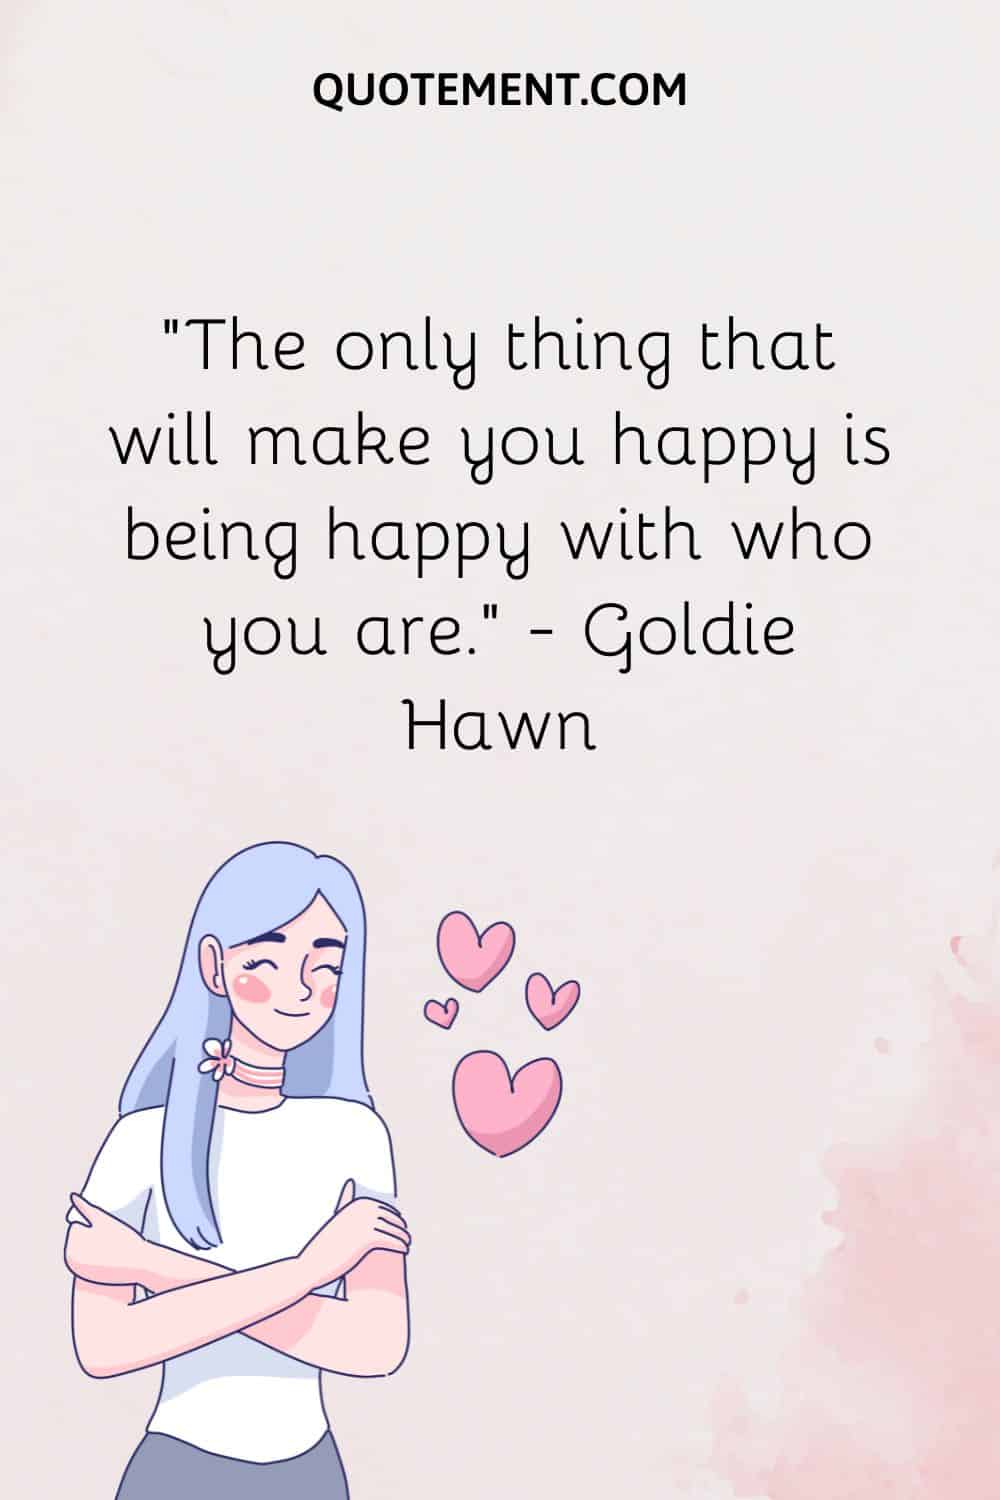 The only thing that will make you happy is being happy with who you are